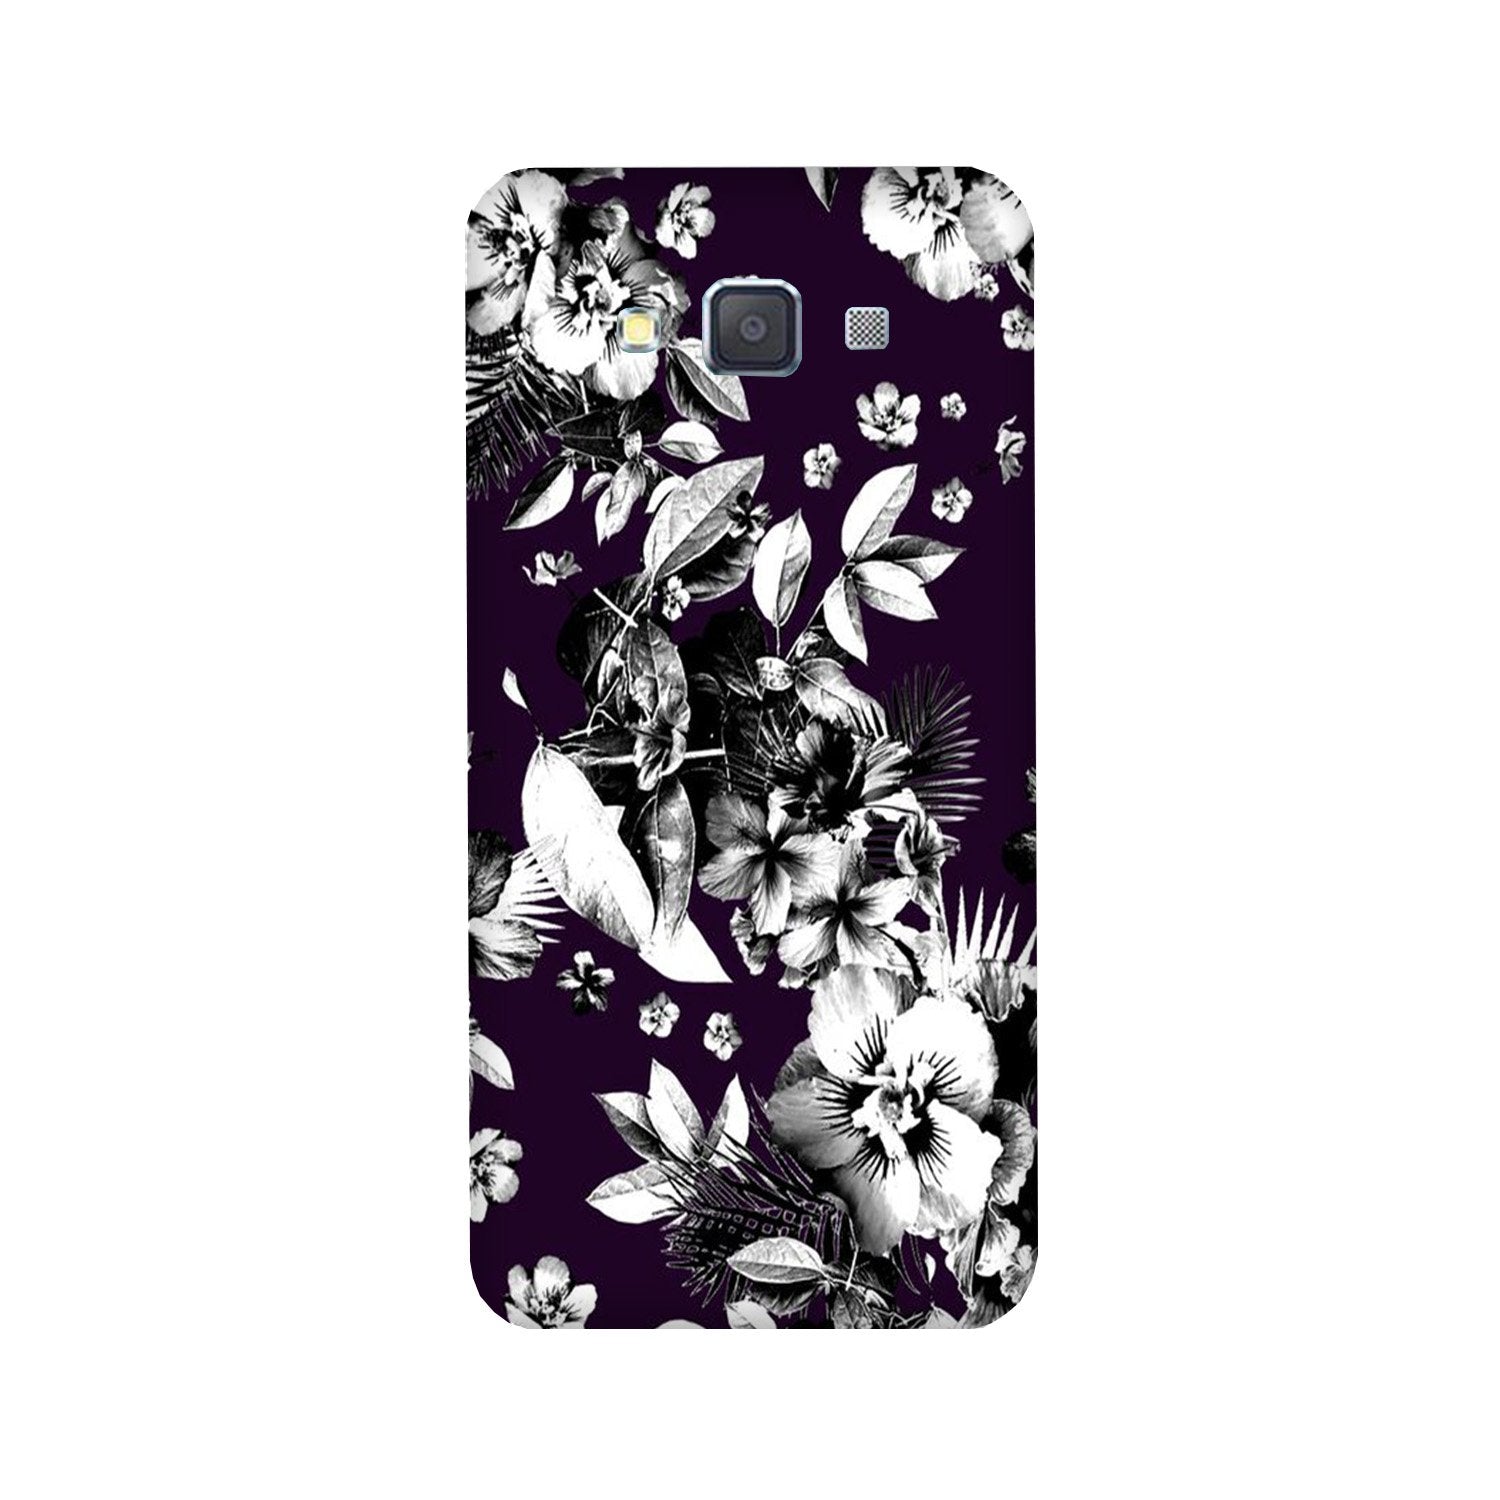 white flowers Case for Galaxy ON7/ON7 Pro